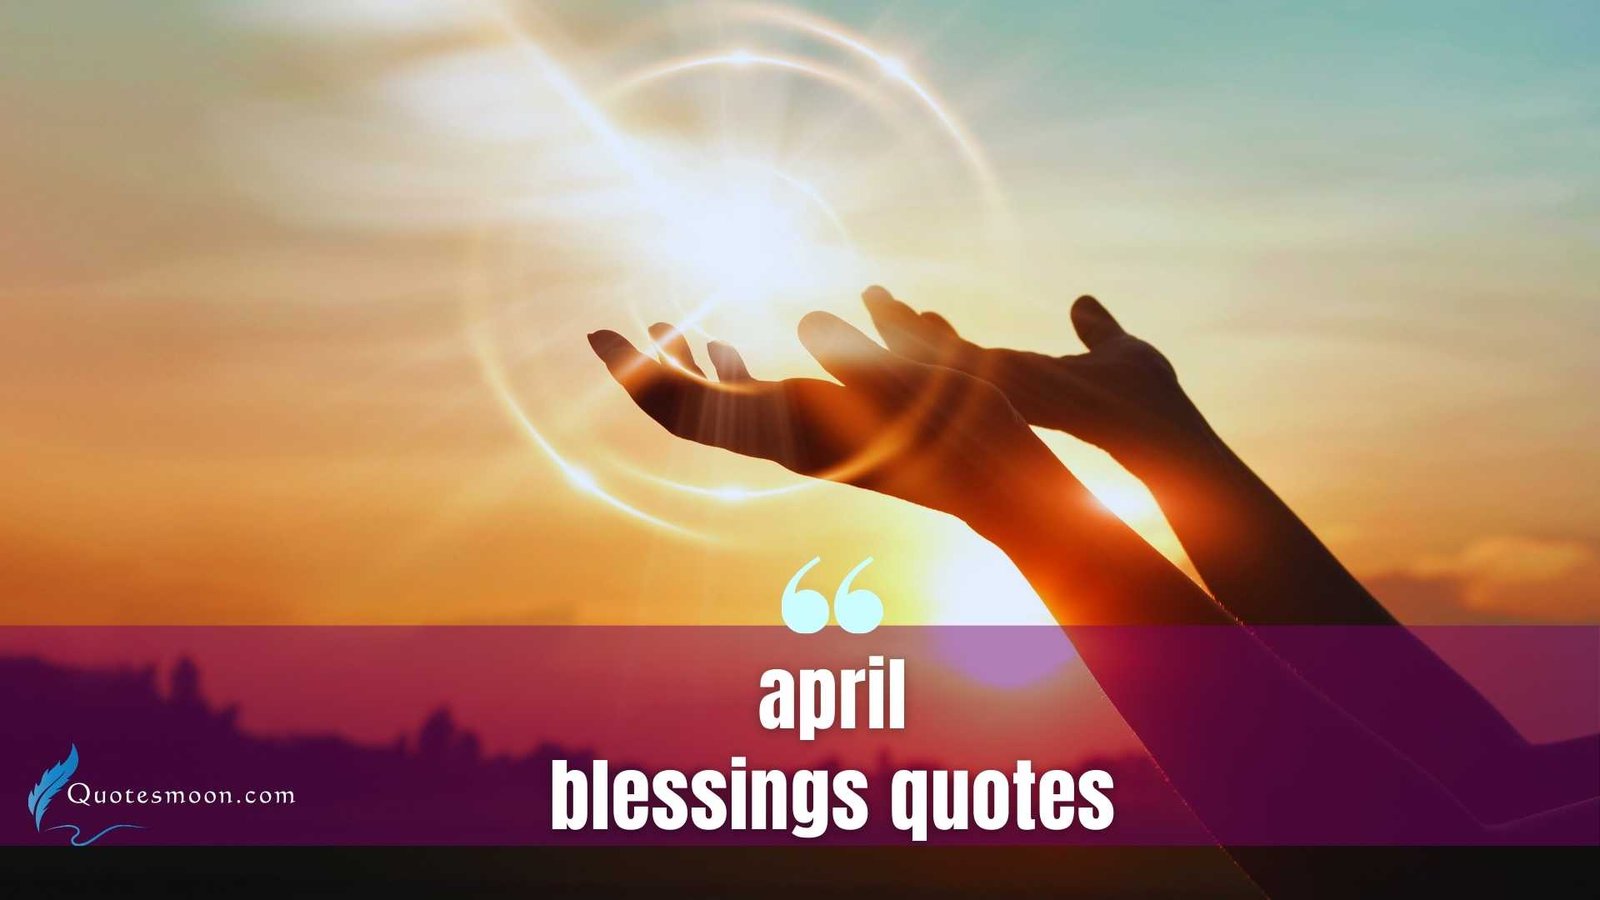 april blessings quotes images